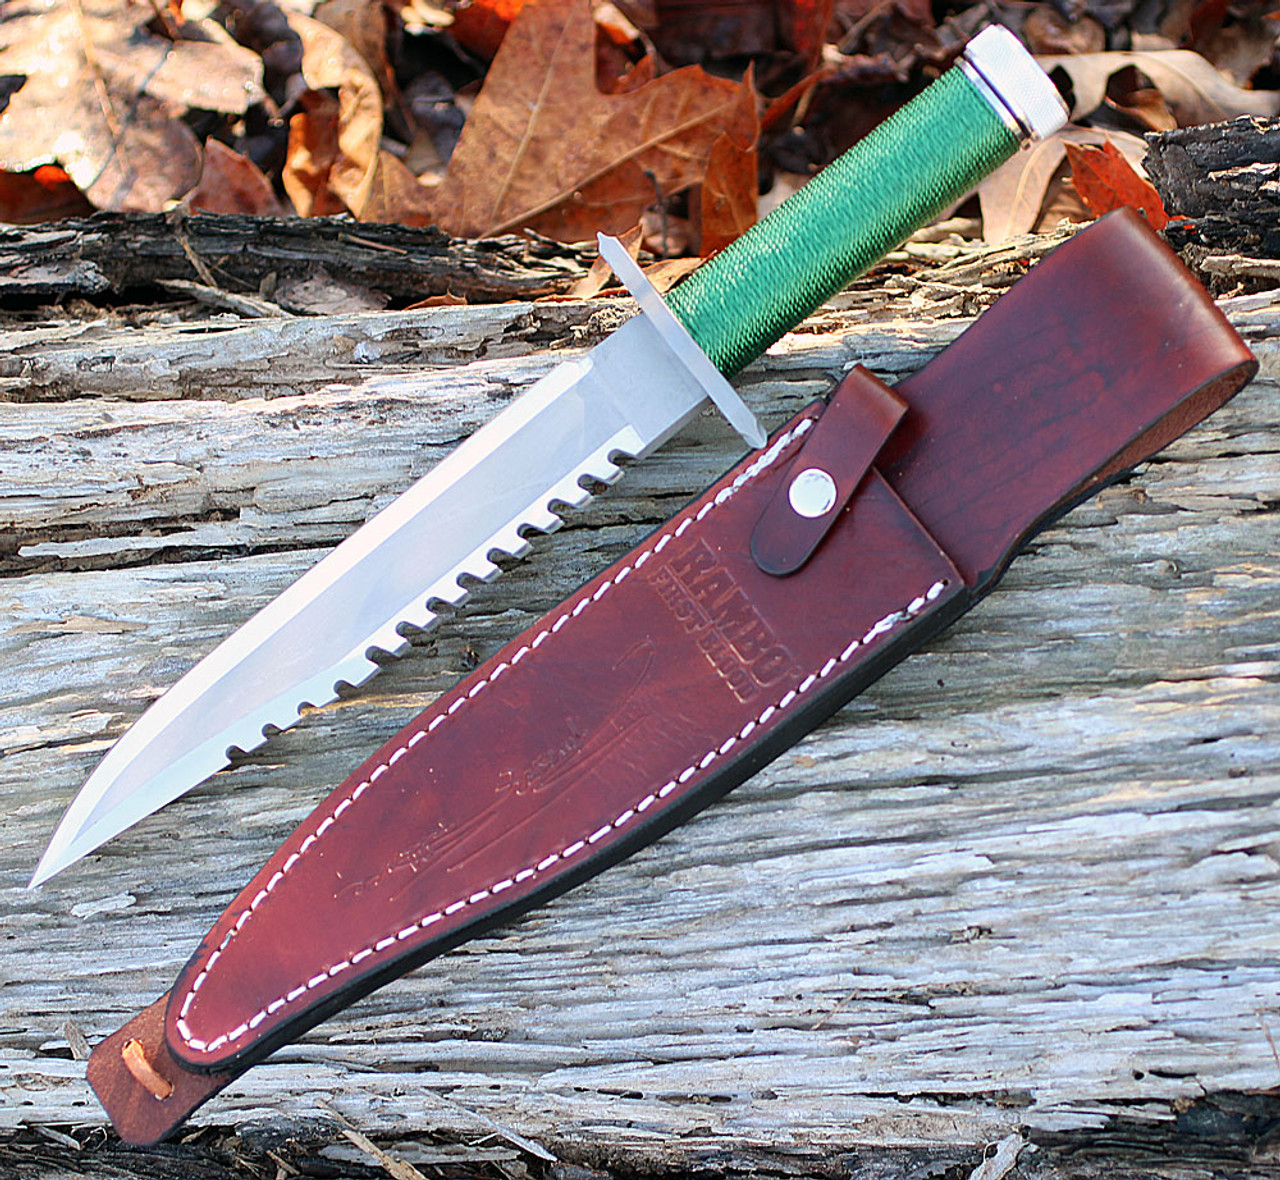 Rambo 9292 First Blood Standard Edition, 9" Stainless Plain Blade, Green Nylon Cord-wrapped Handle